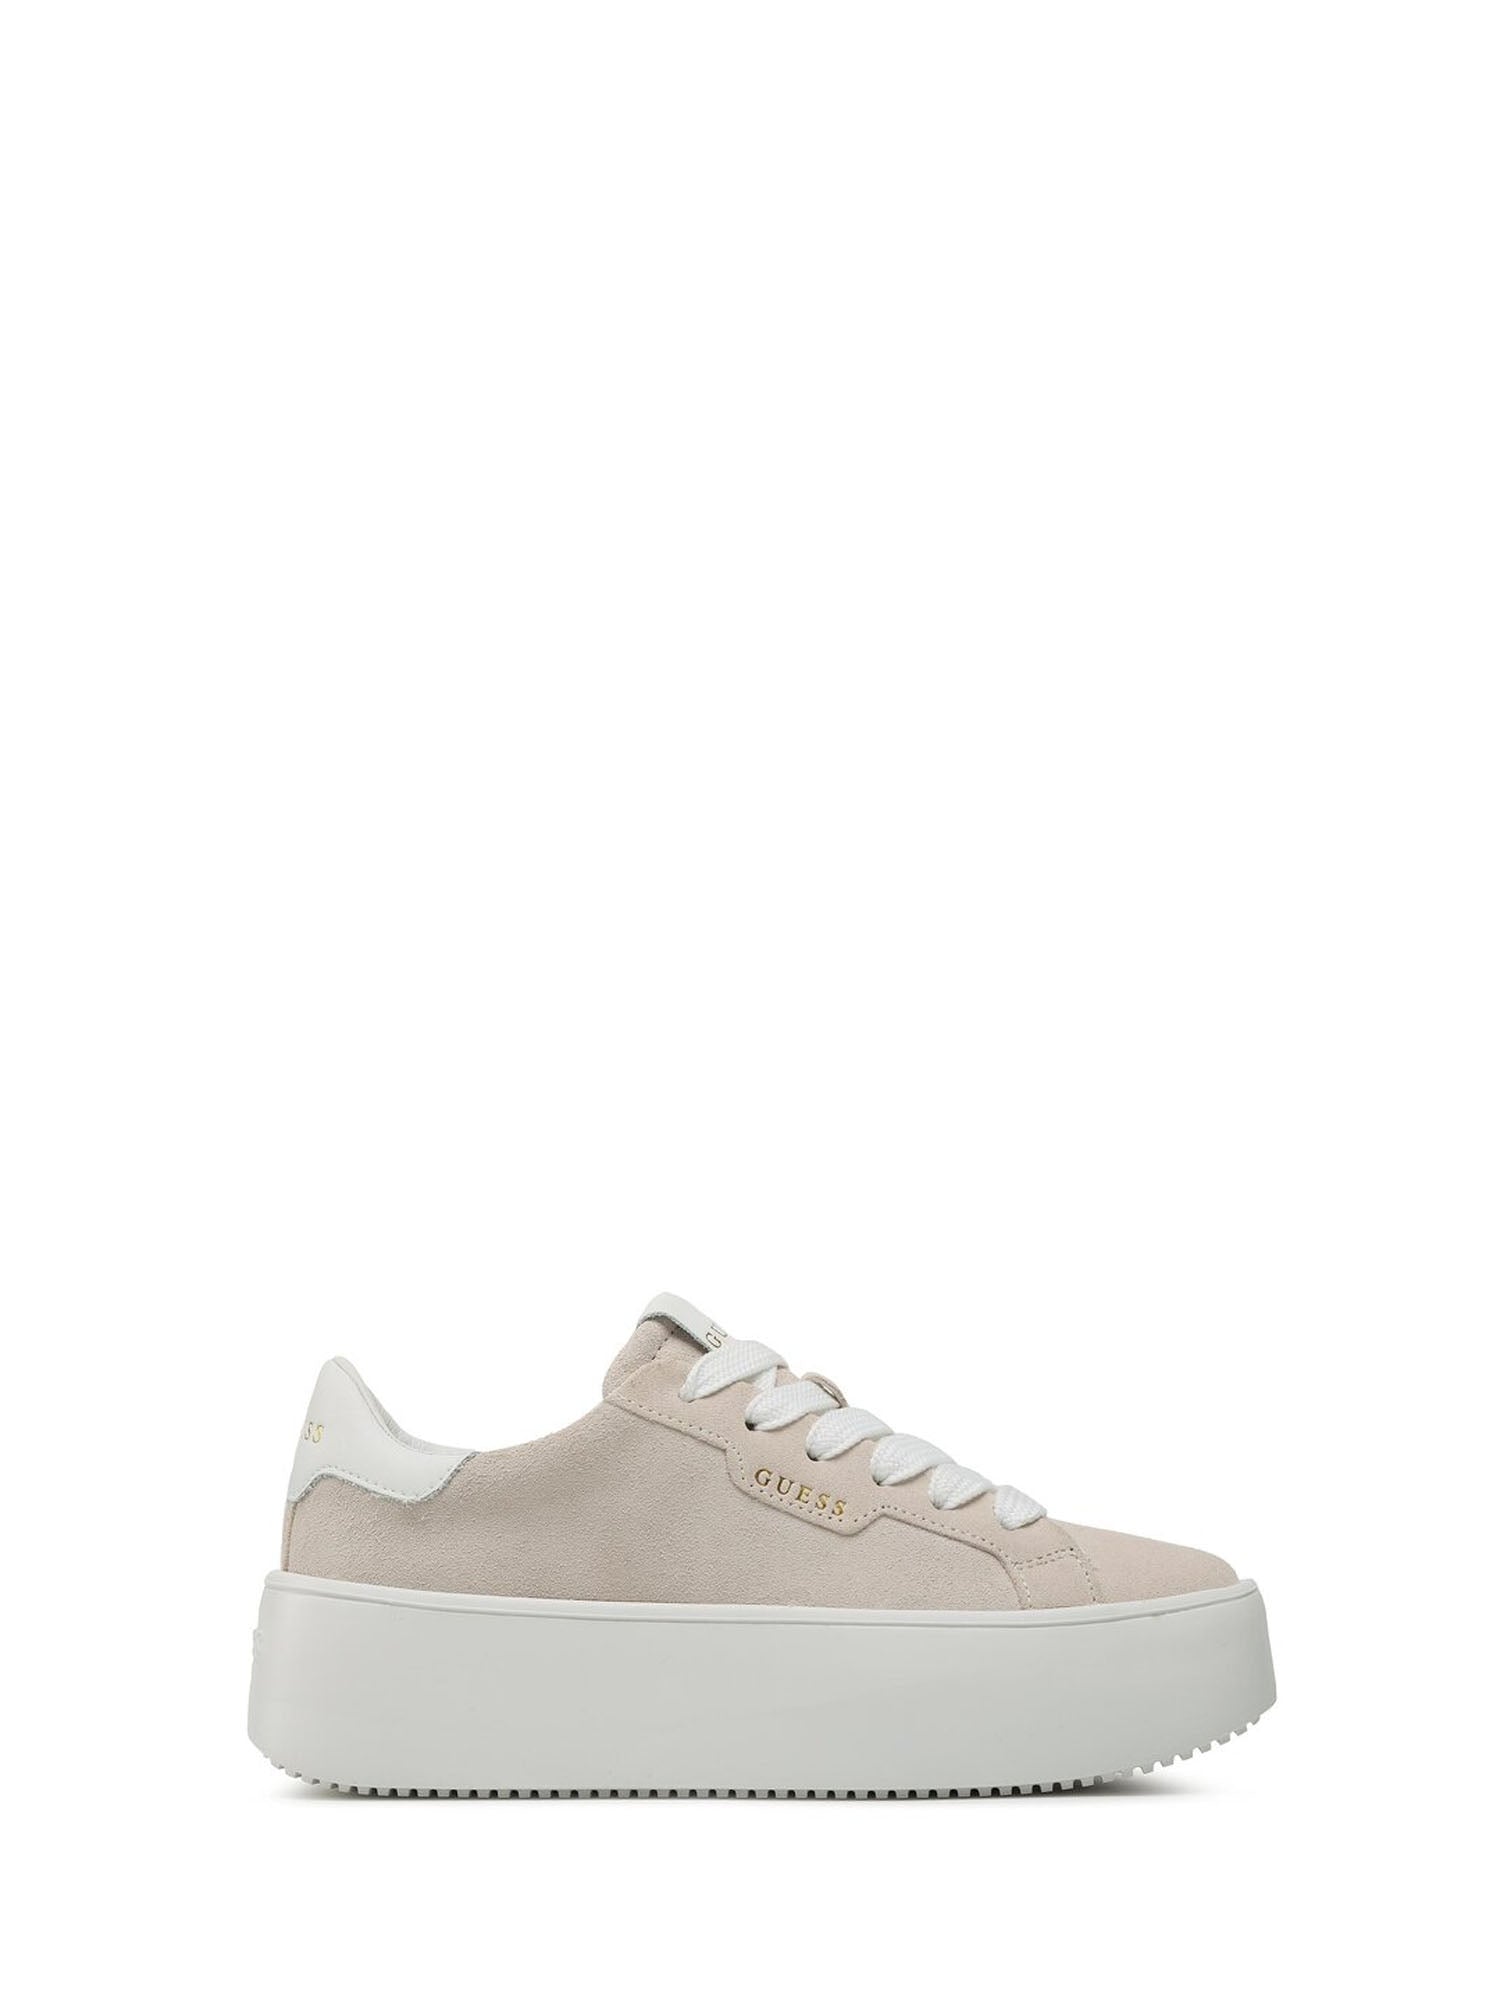 GUESS JEANS SHOES SNEAKERS BASSE MARILYN ROSA-BIANCO